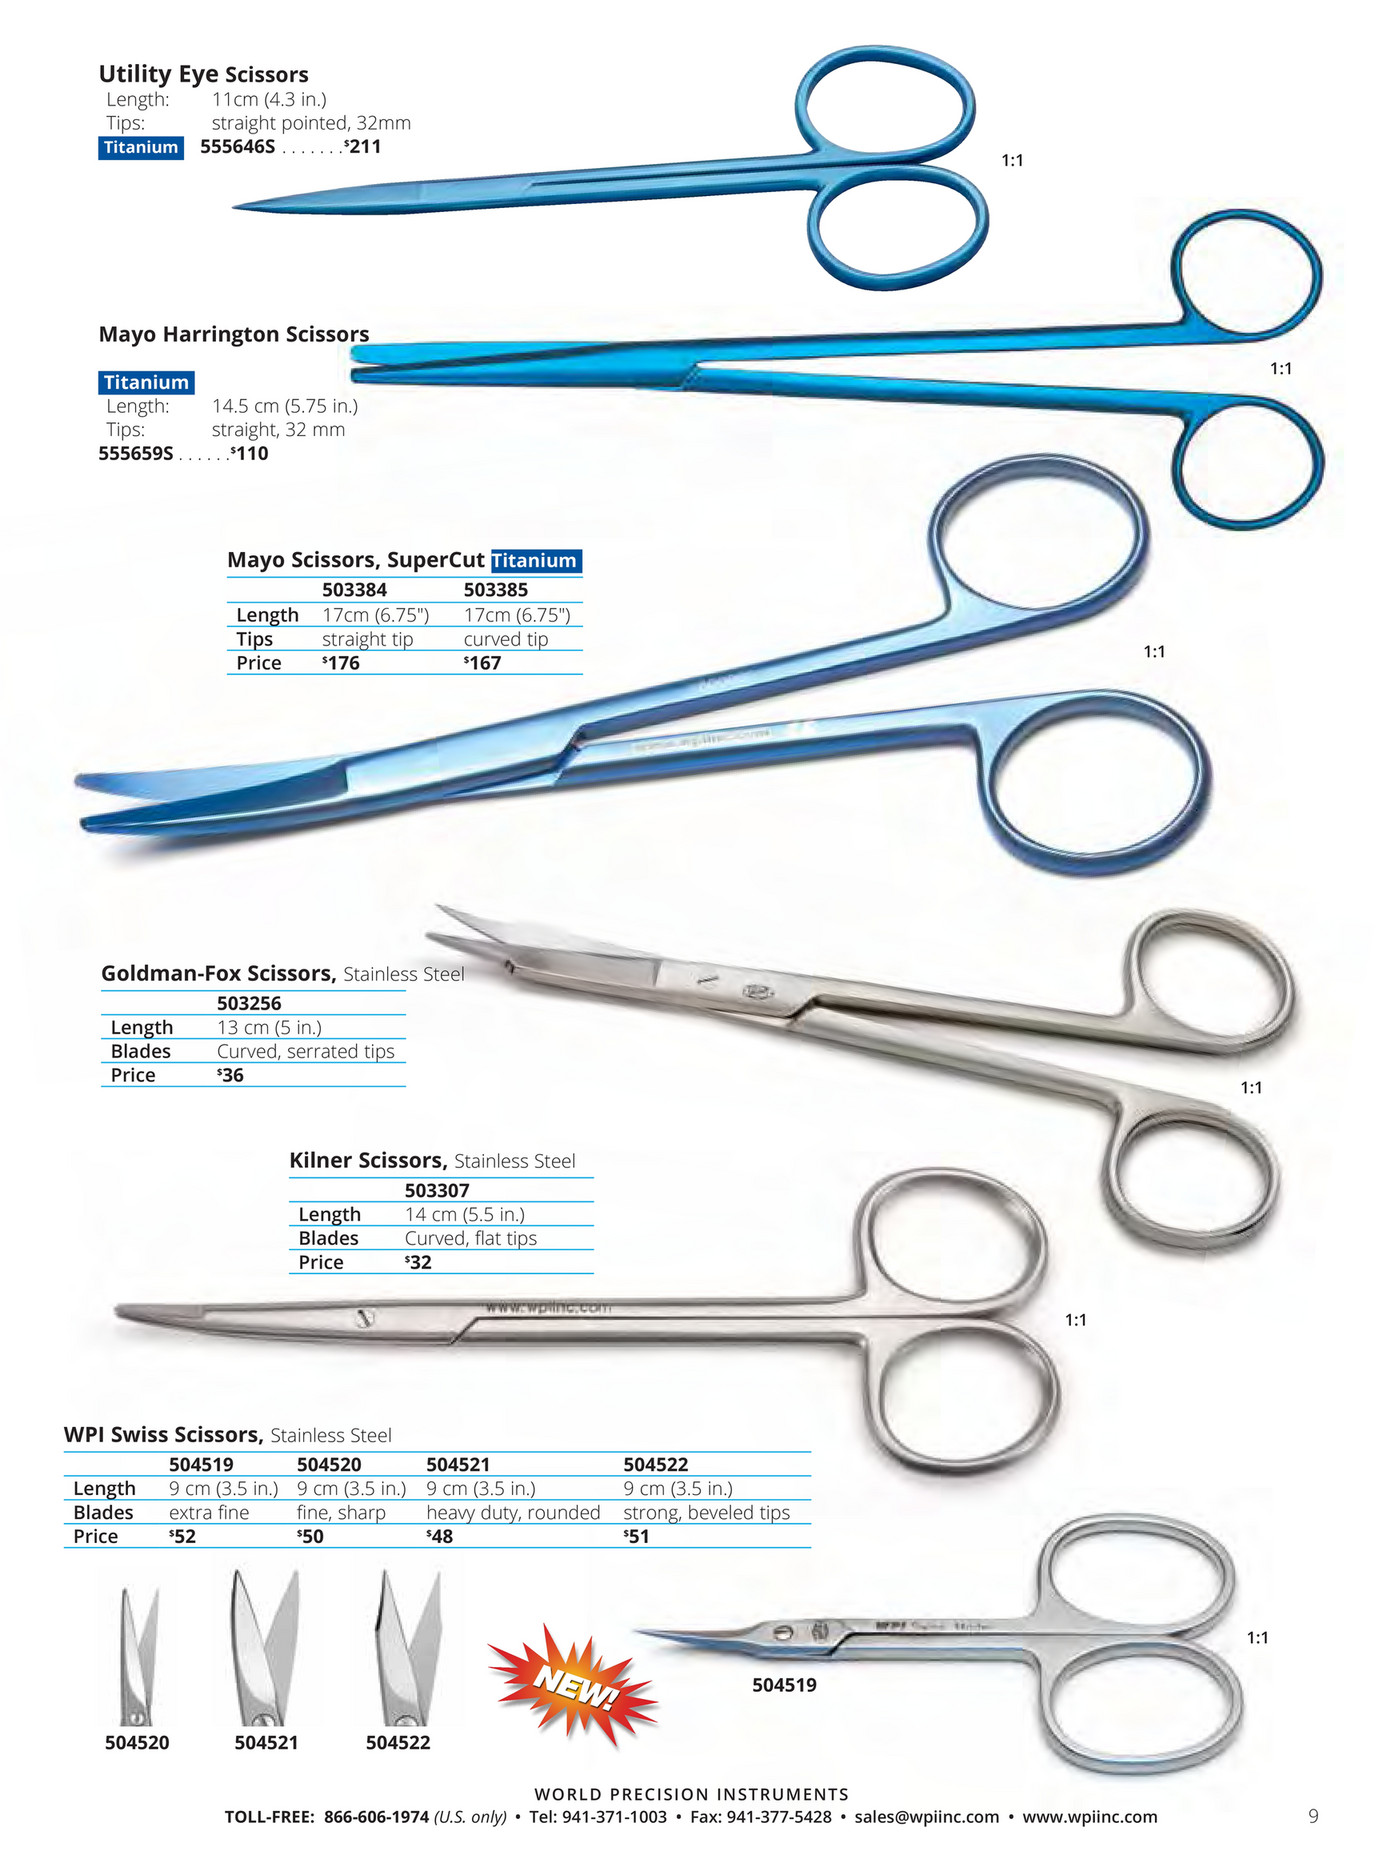 World Precision Instruments-Surgical Instrument Catalog - Page 10-11